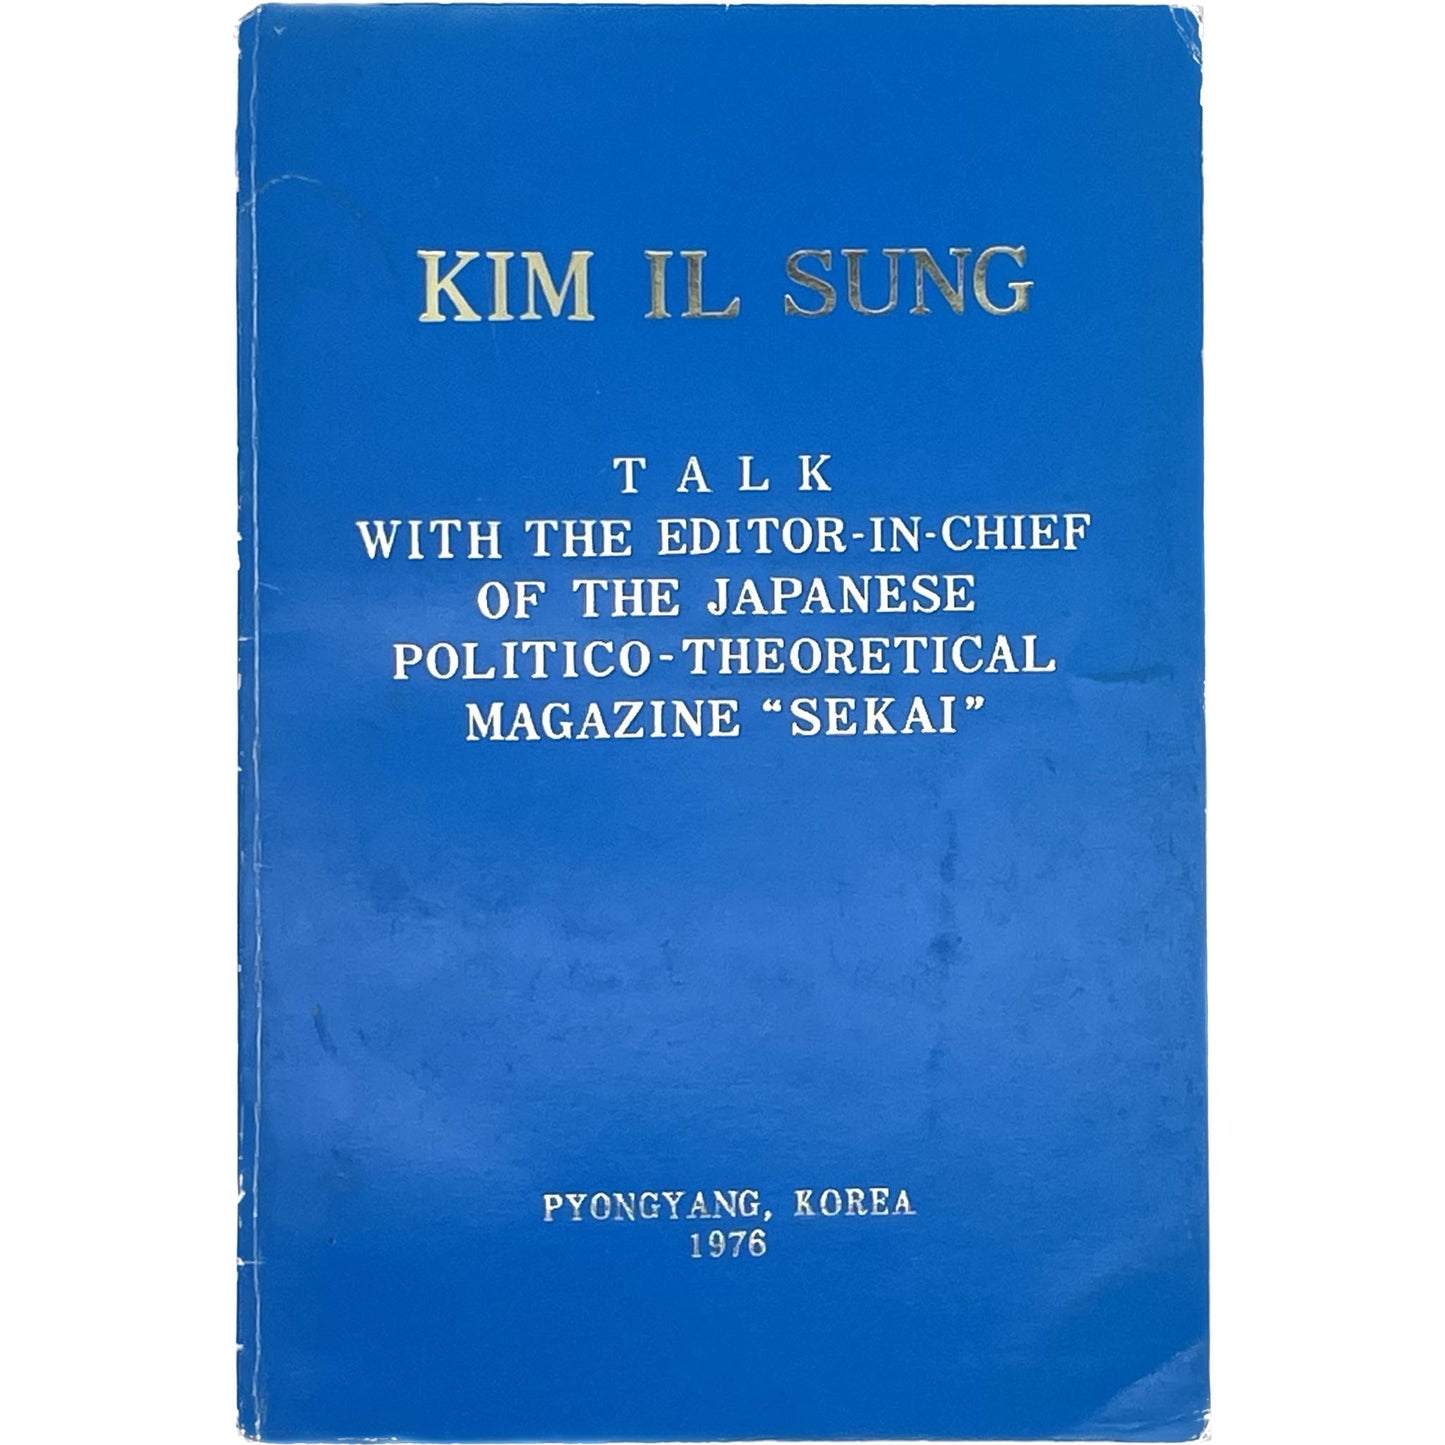 Kim Il Sung: Talk with the Editor-in-Chief of the Japanese Politico-Theoretical Magazine "Sekai"